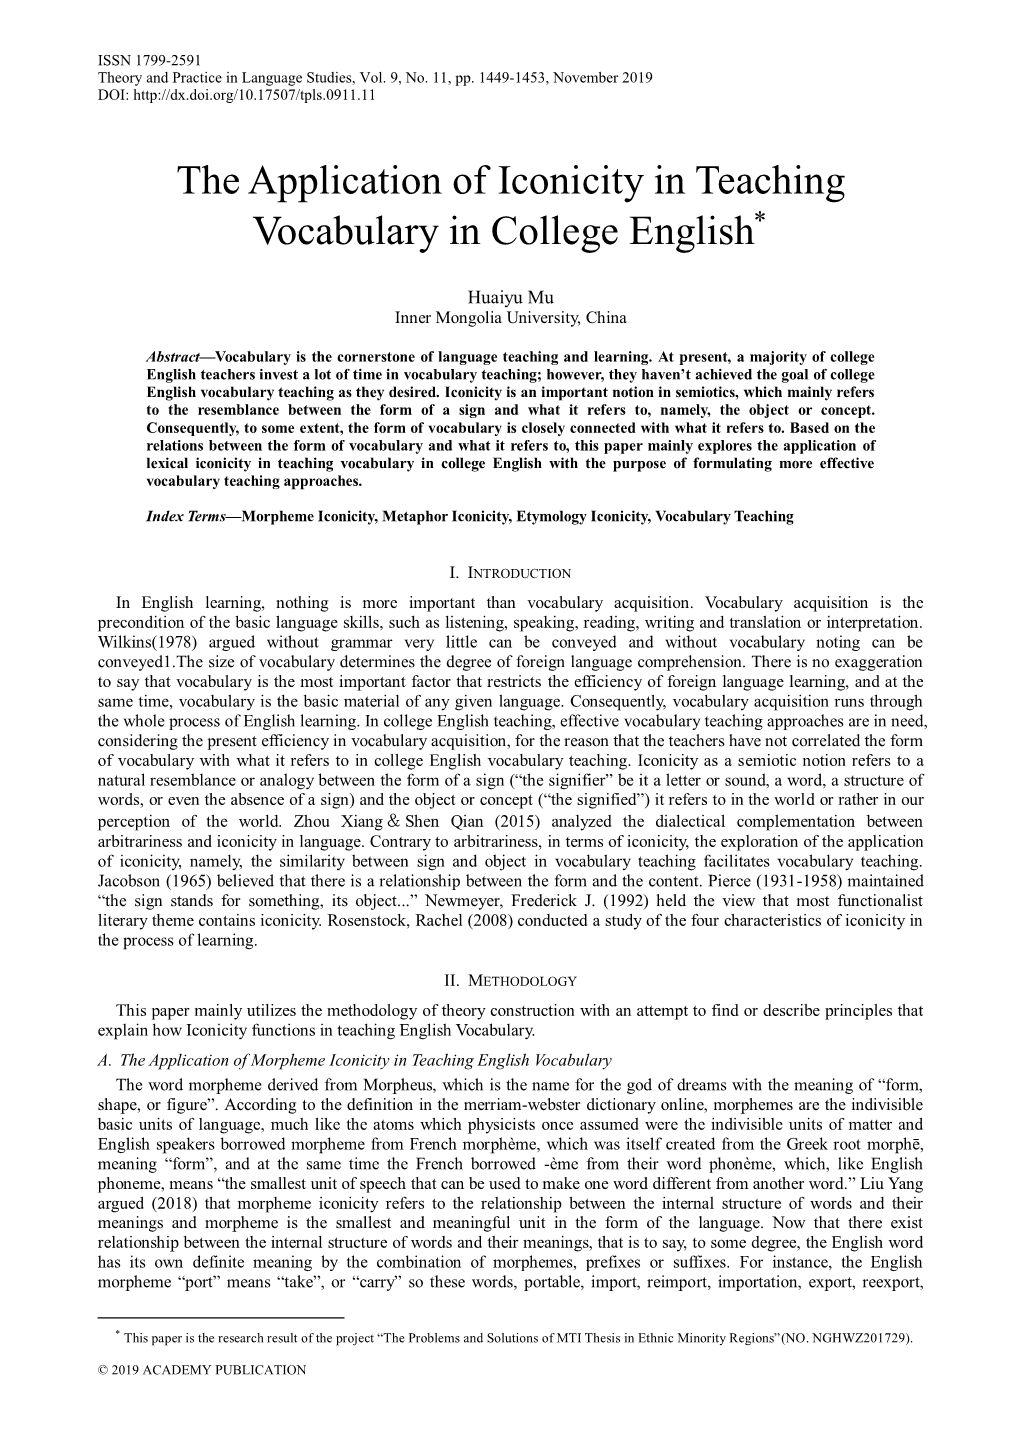 The Application of Iconicity in Teaching Vocabulary in College English